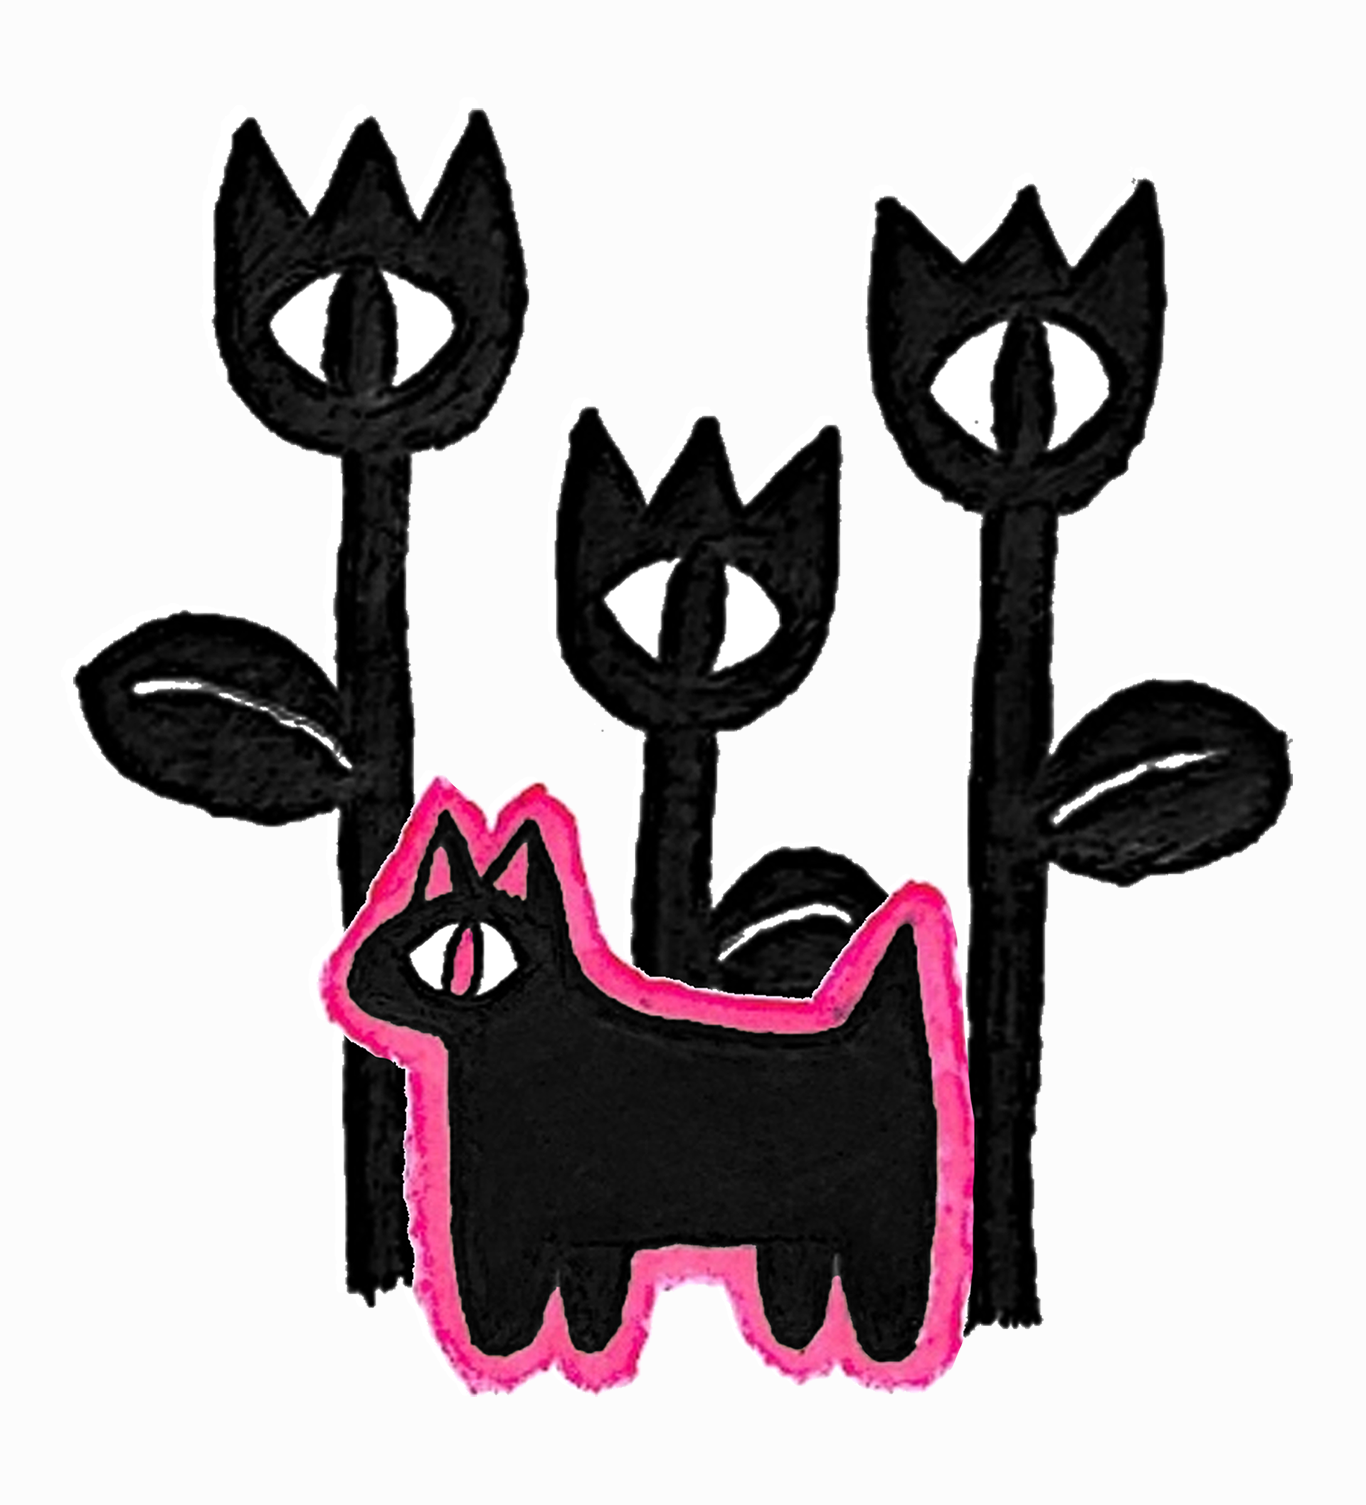 Drawing of a simply stylized, vaguely cat-like critter that is solid black with pink details. They are surrounded by a pink outline, and behind them are 3 solid black flowers of varying heights each with one eye with a black pupil, thick stem, and black leaf with a white line detail. The entire composition lies on a slightly off-white background.